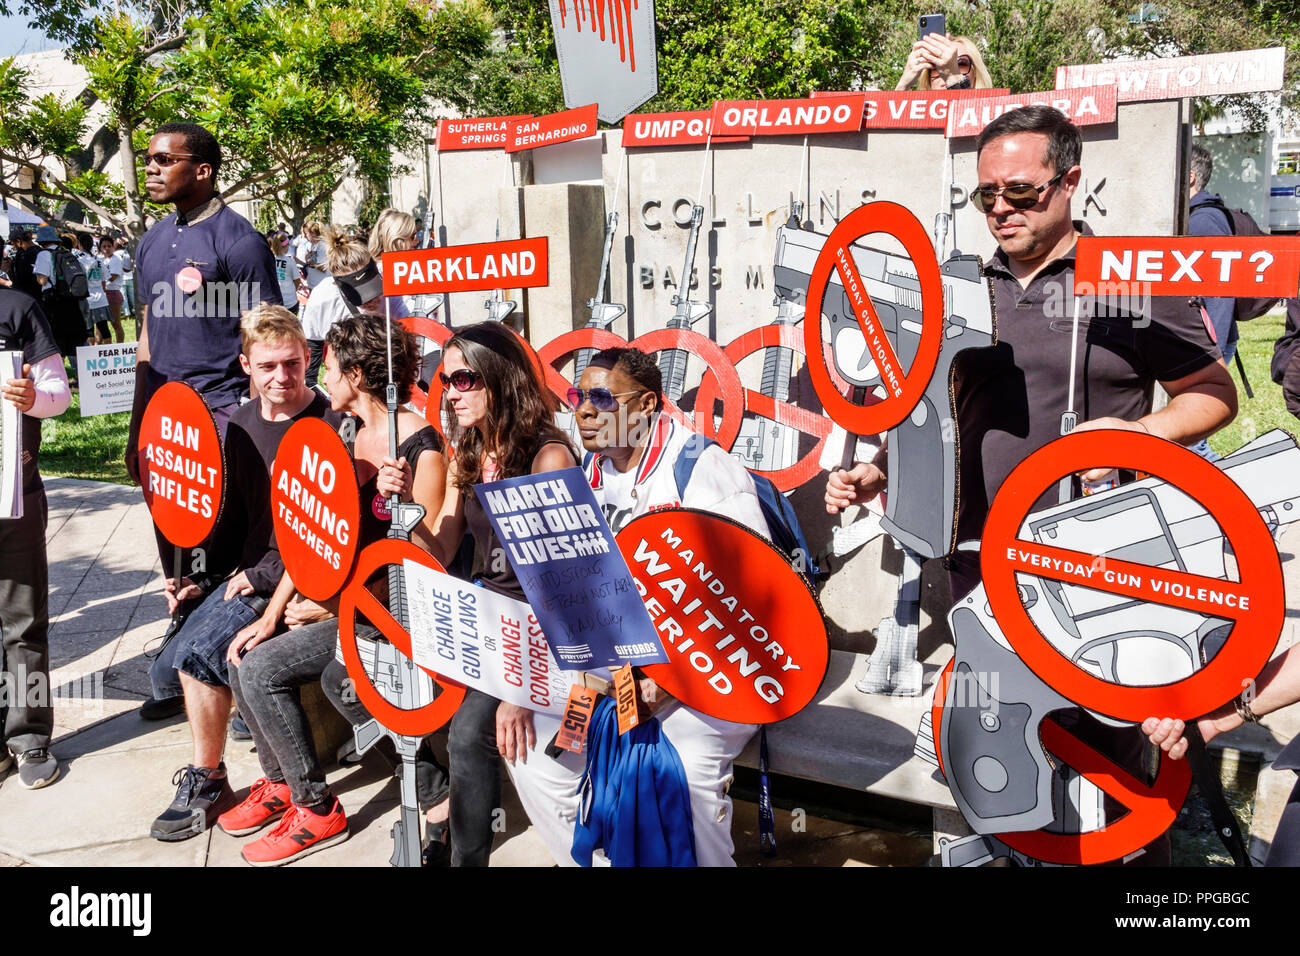 Miami Beach Florida,Collins Park,March For Our Lives,public high school shootings gun violence protest,student students holding signs posters,Black ma Stock Photo